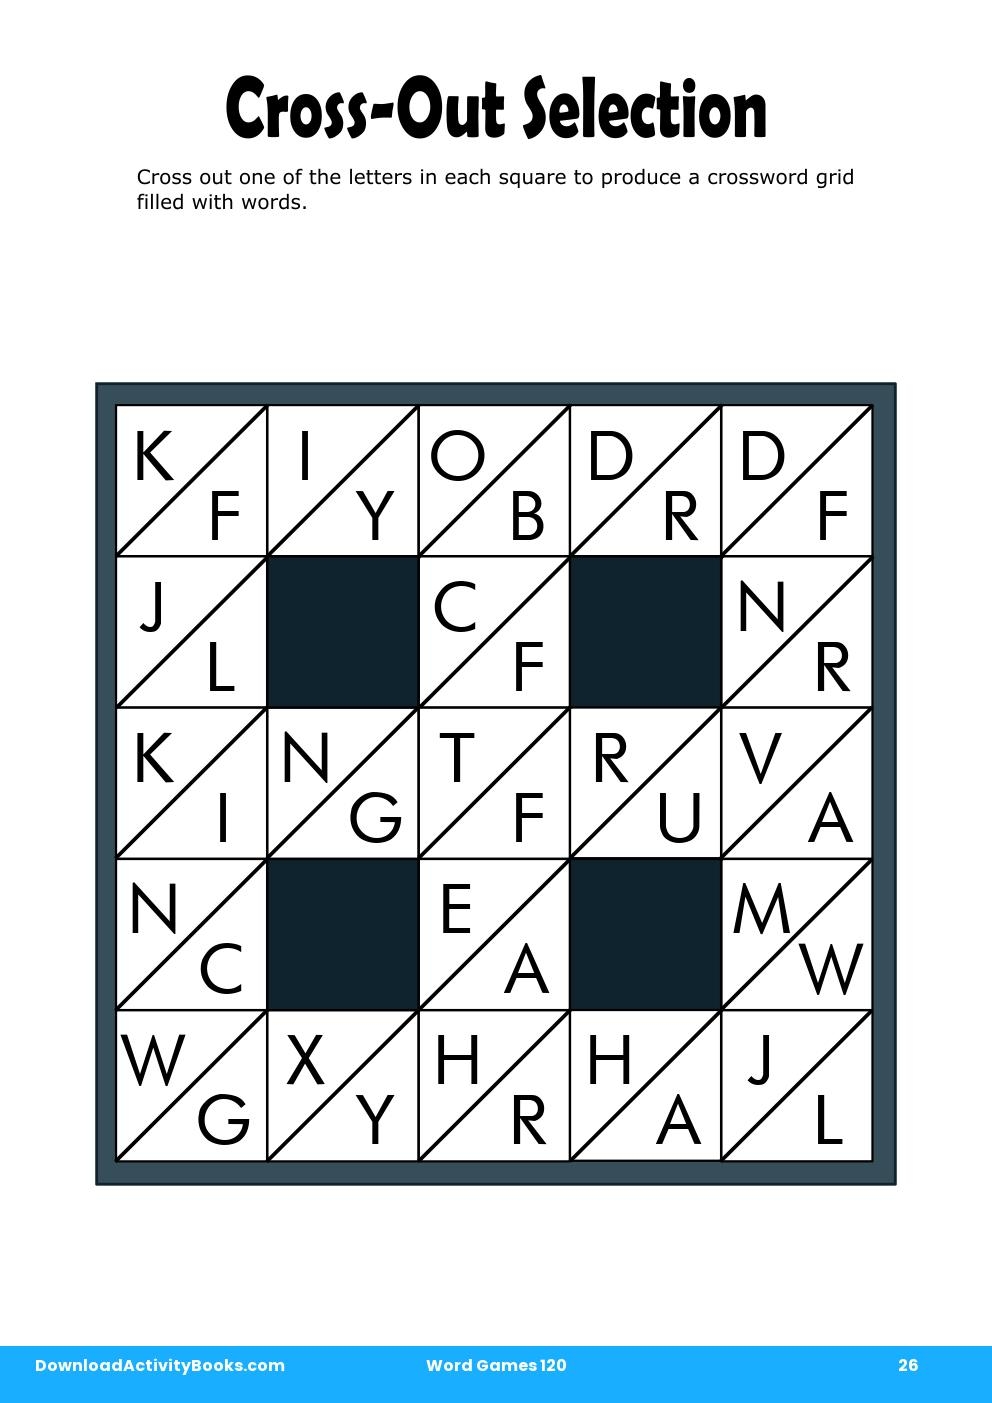 Cross-Out Selection in Word Games 120